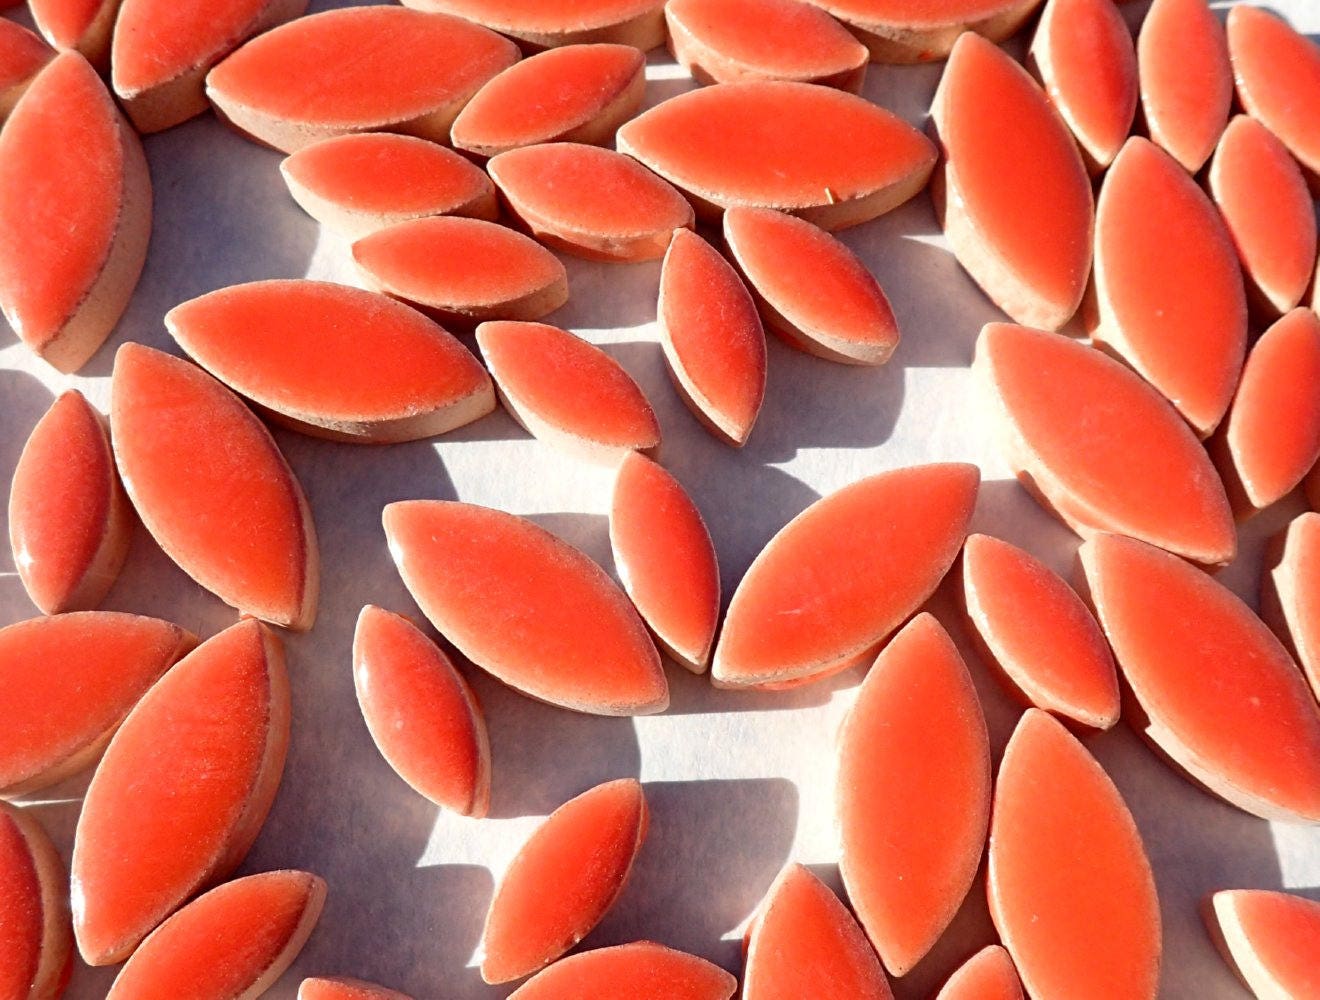 Salmon Orange Pink Petals Mosaic Tiles - 50g Ceramic Leaves in Mix of 2 Sizes 1/2" and 3/4"